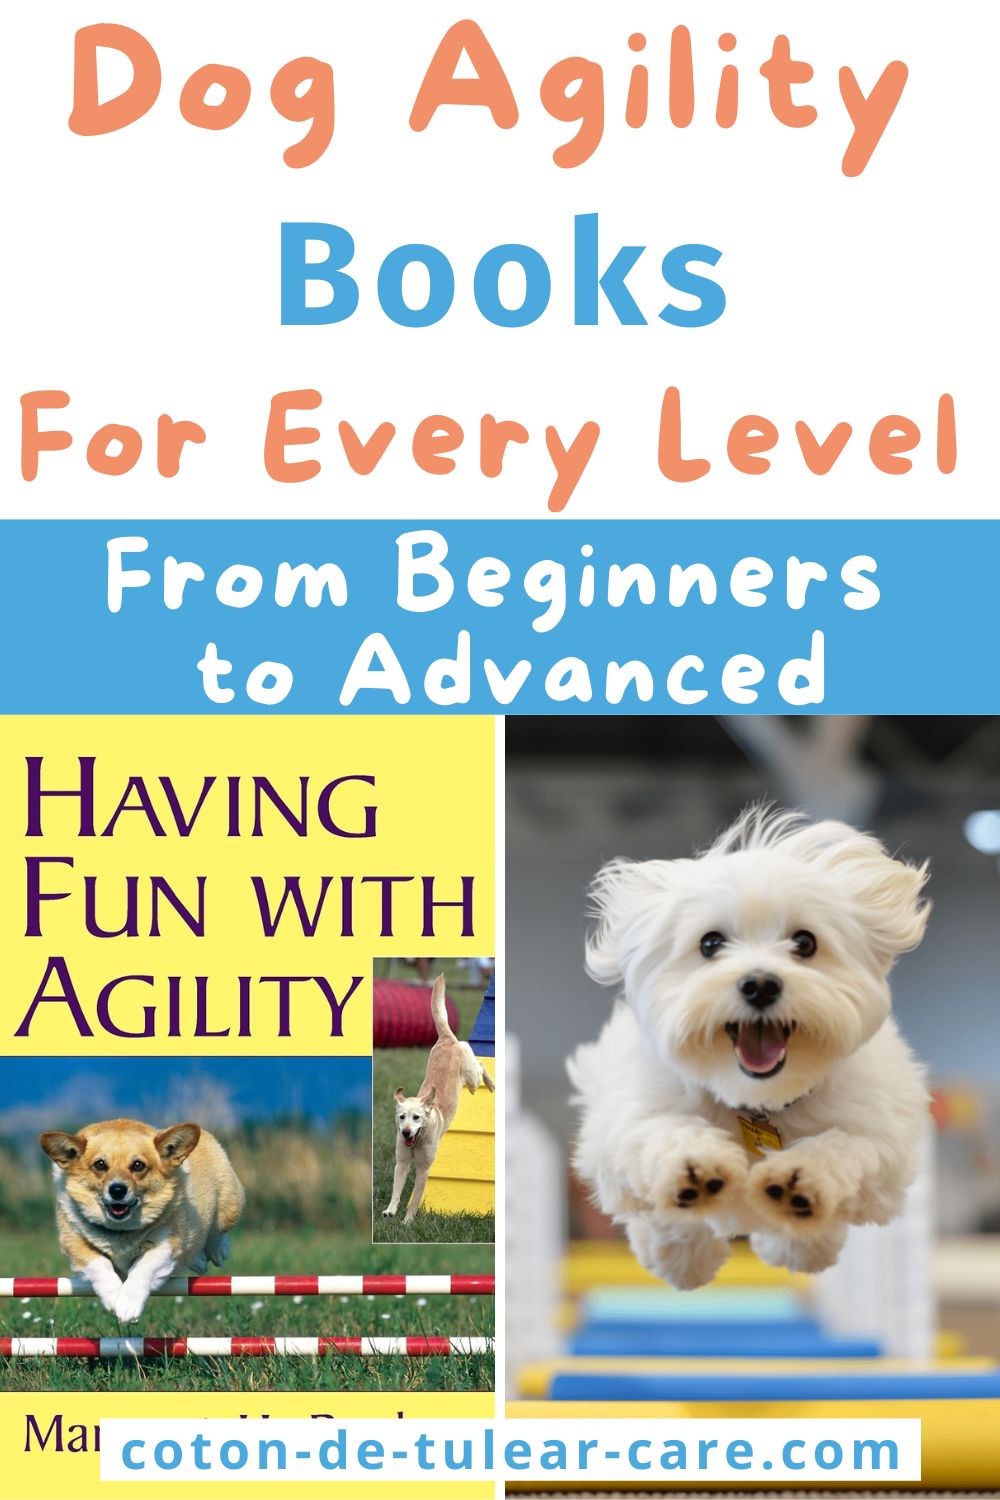 dog agility books that will help beginners as well as advanced agility enthusiasts